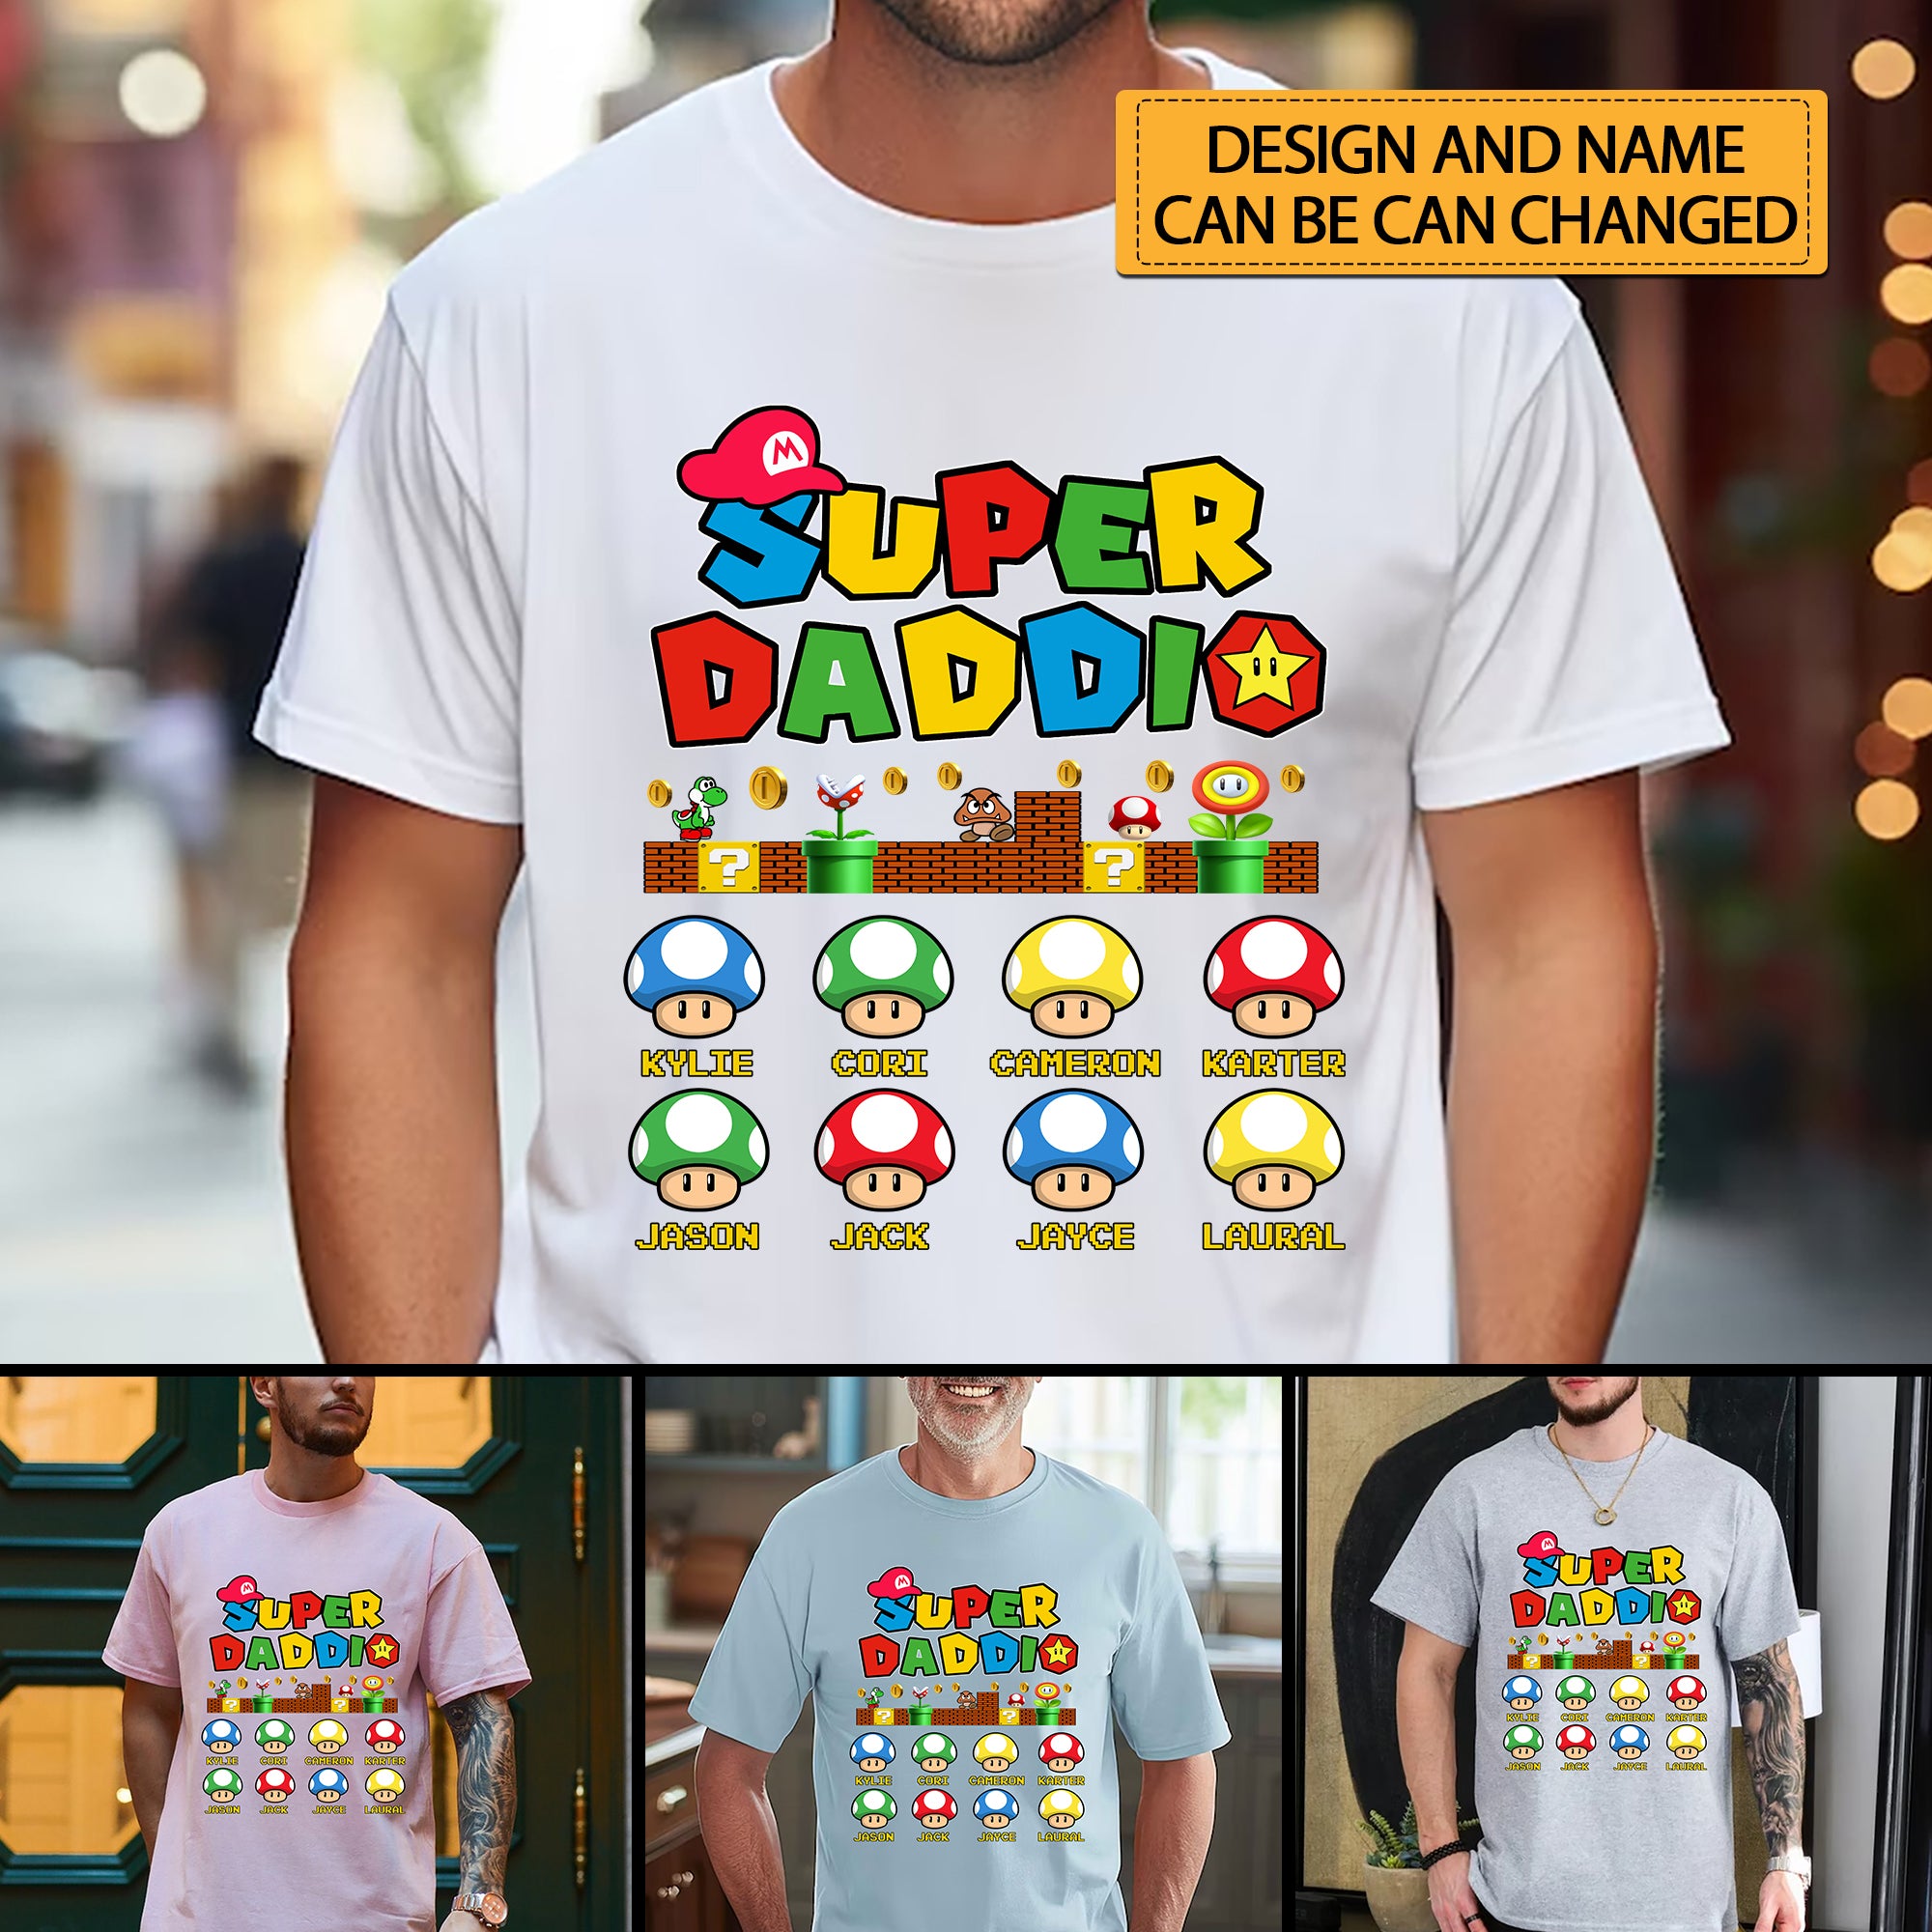 Super Daddio, Happy Father's Day, Custom Appearances And Texts - Personalized Light Shirt